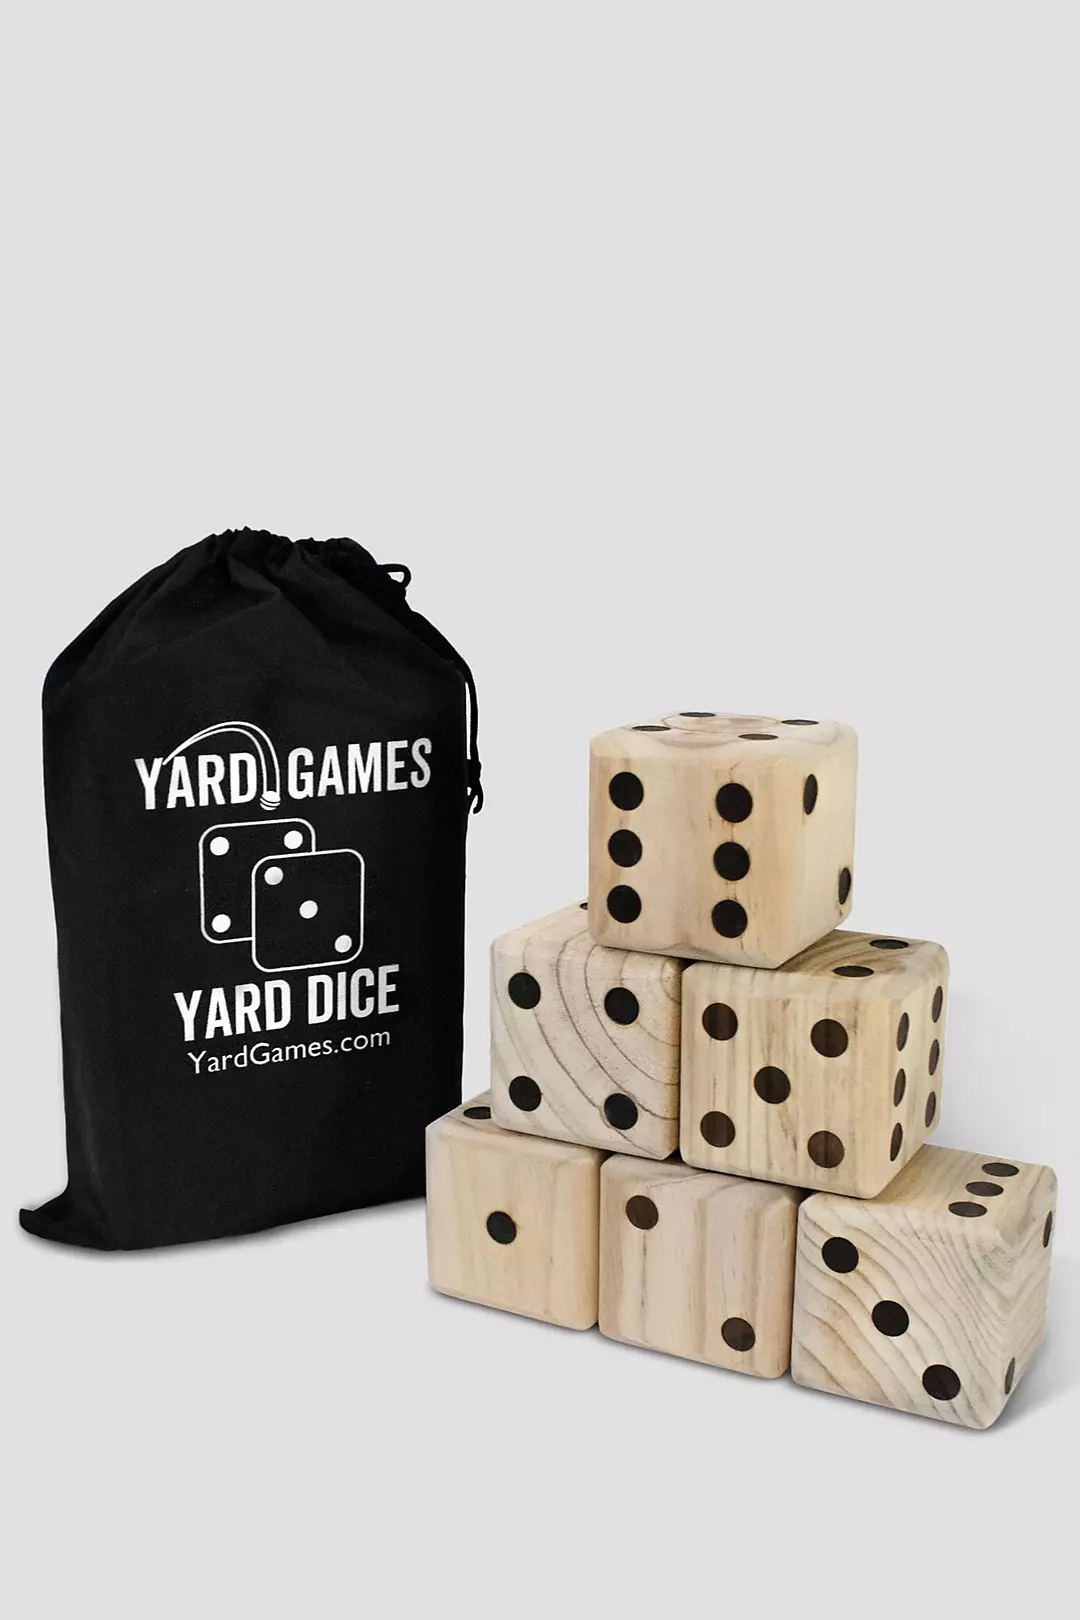 Giant Lawn Dice Game Image